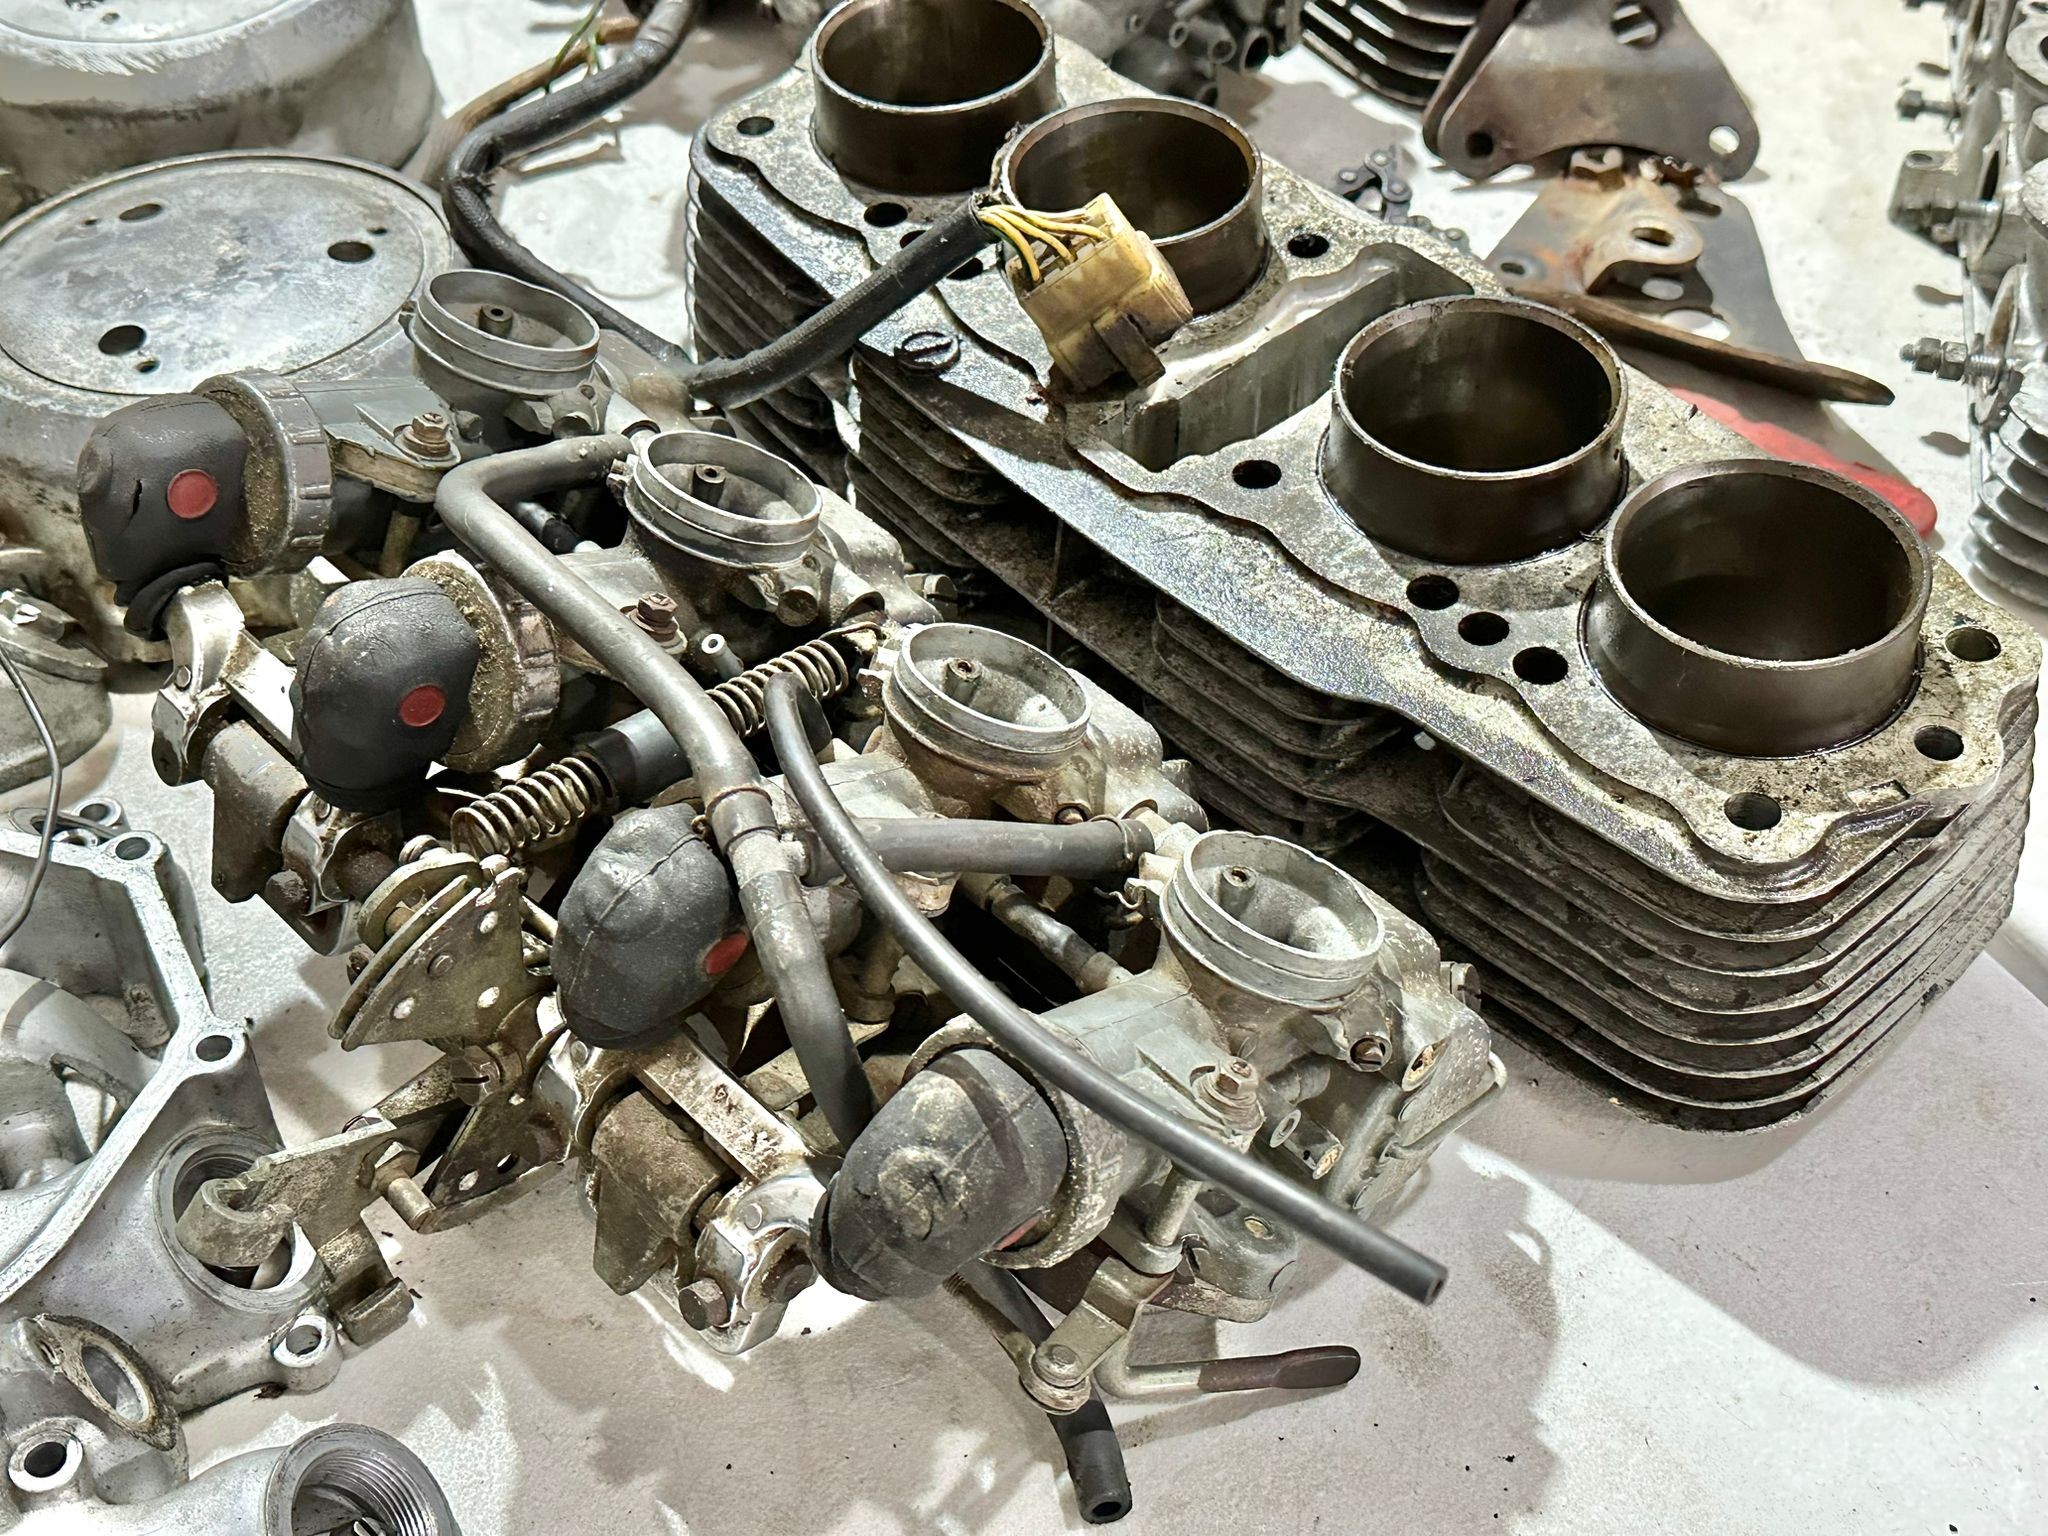 Honda CB500-4 parts with engine - Image 14 of 20